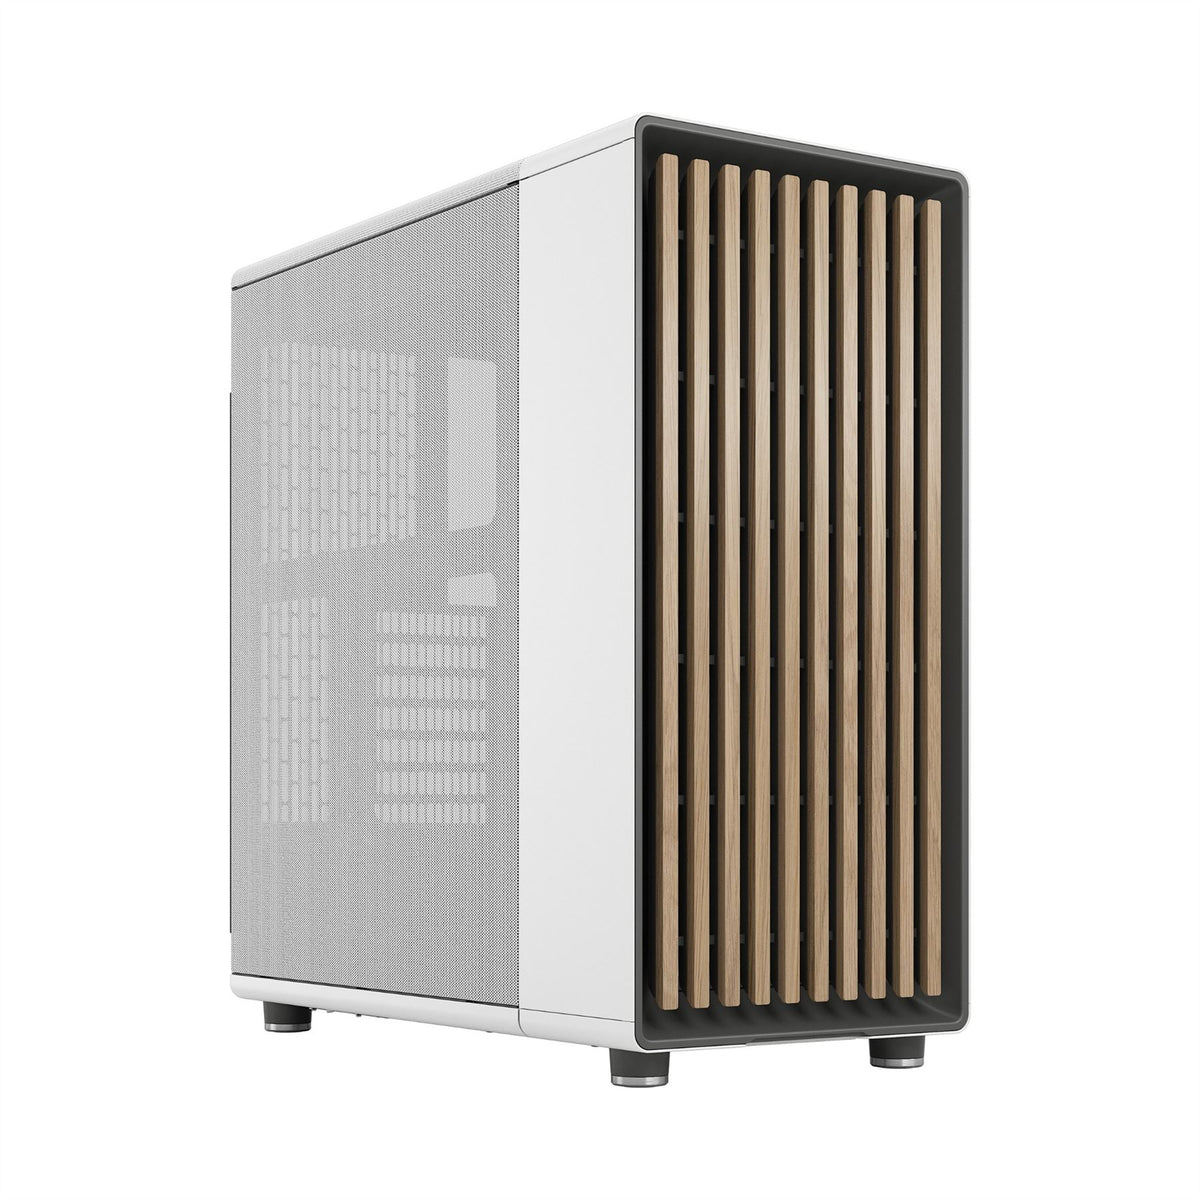 Fractal Design North - ATX Mid Tower Case in White